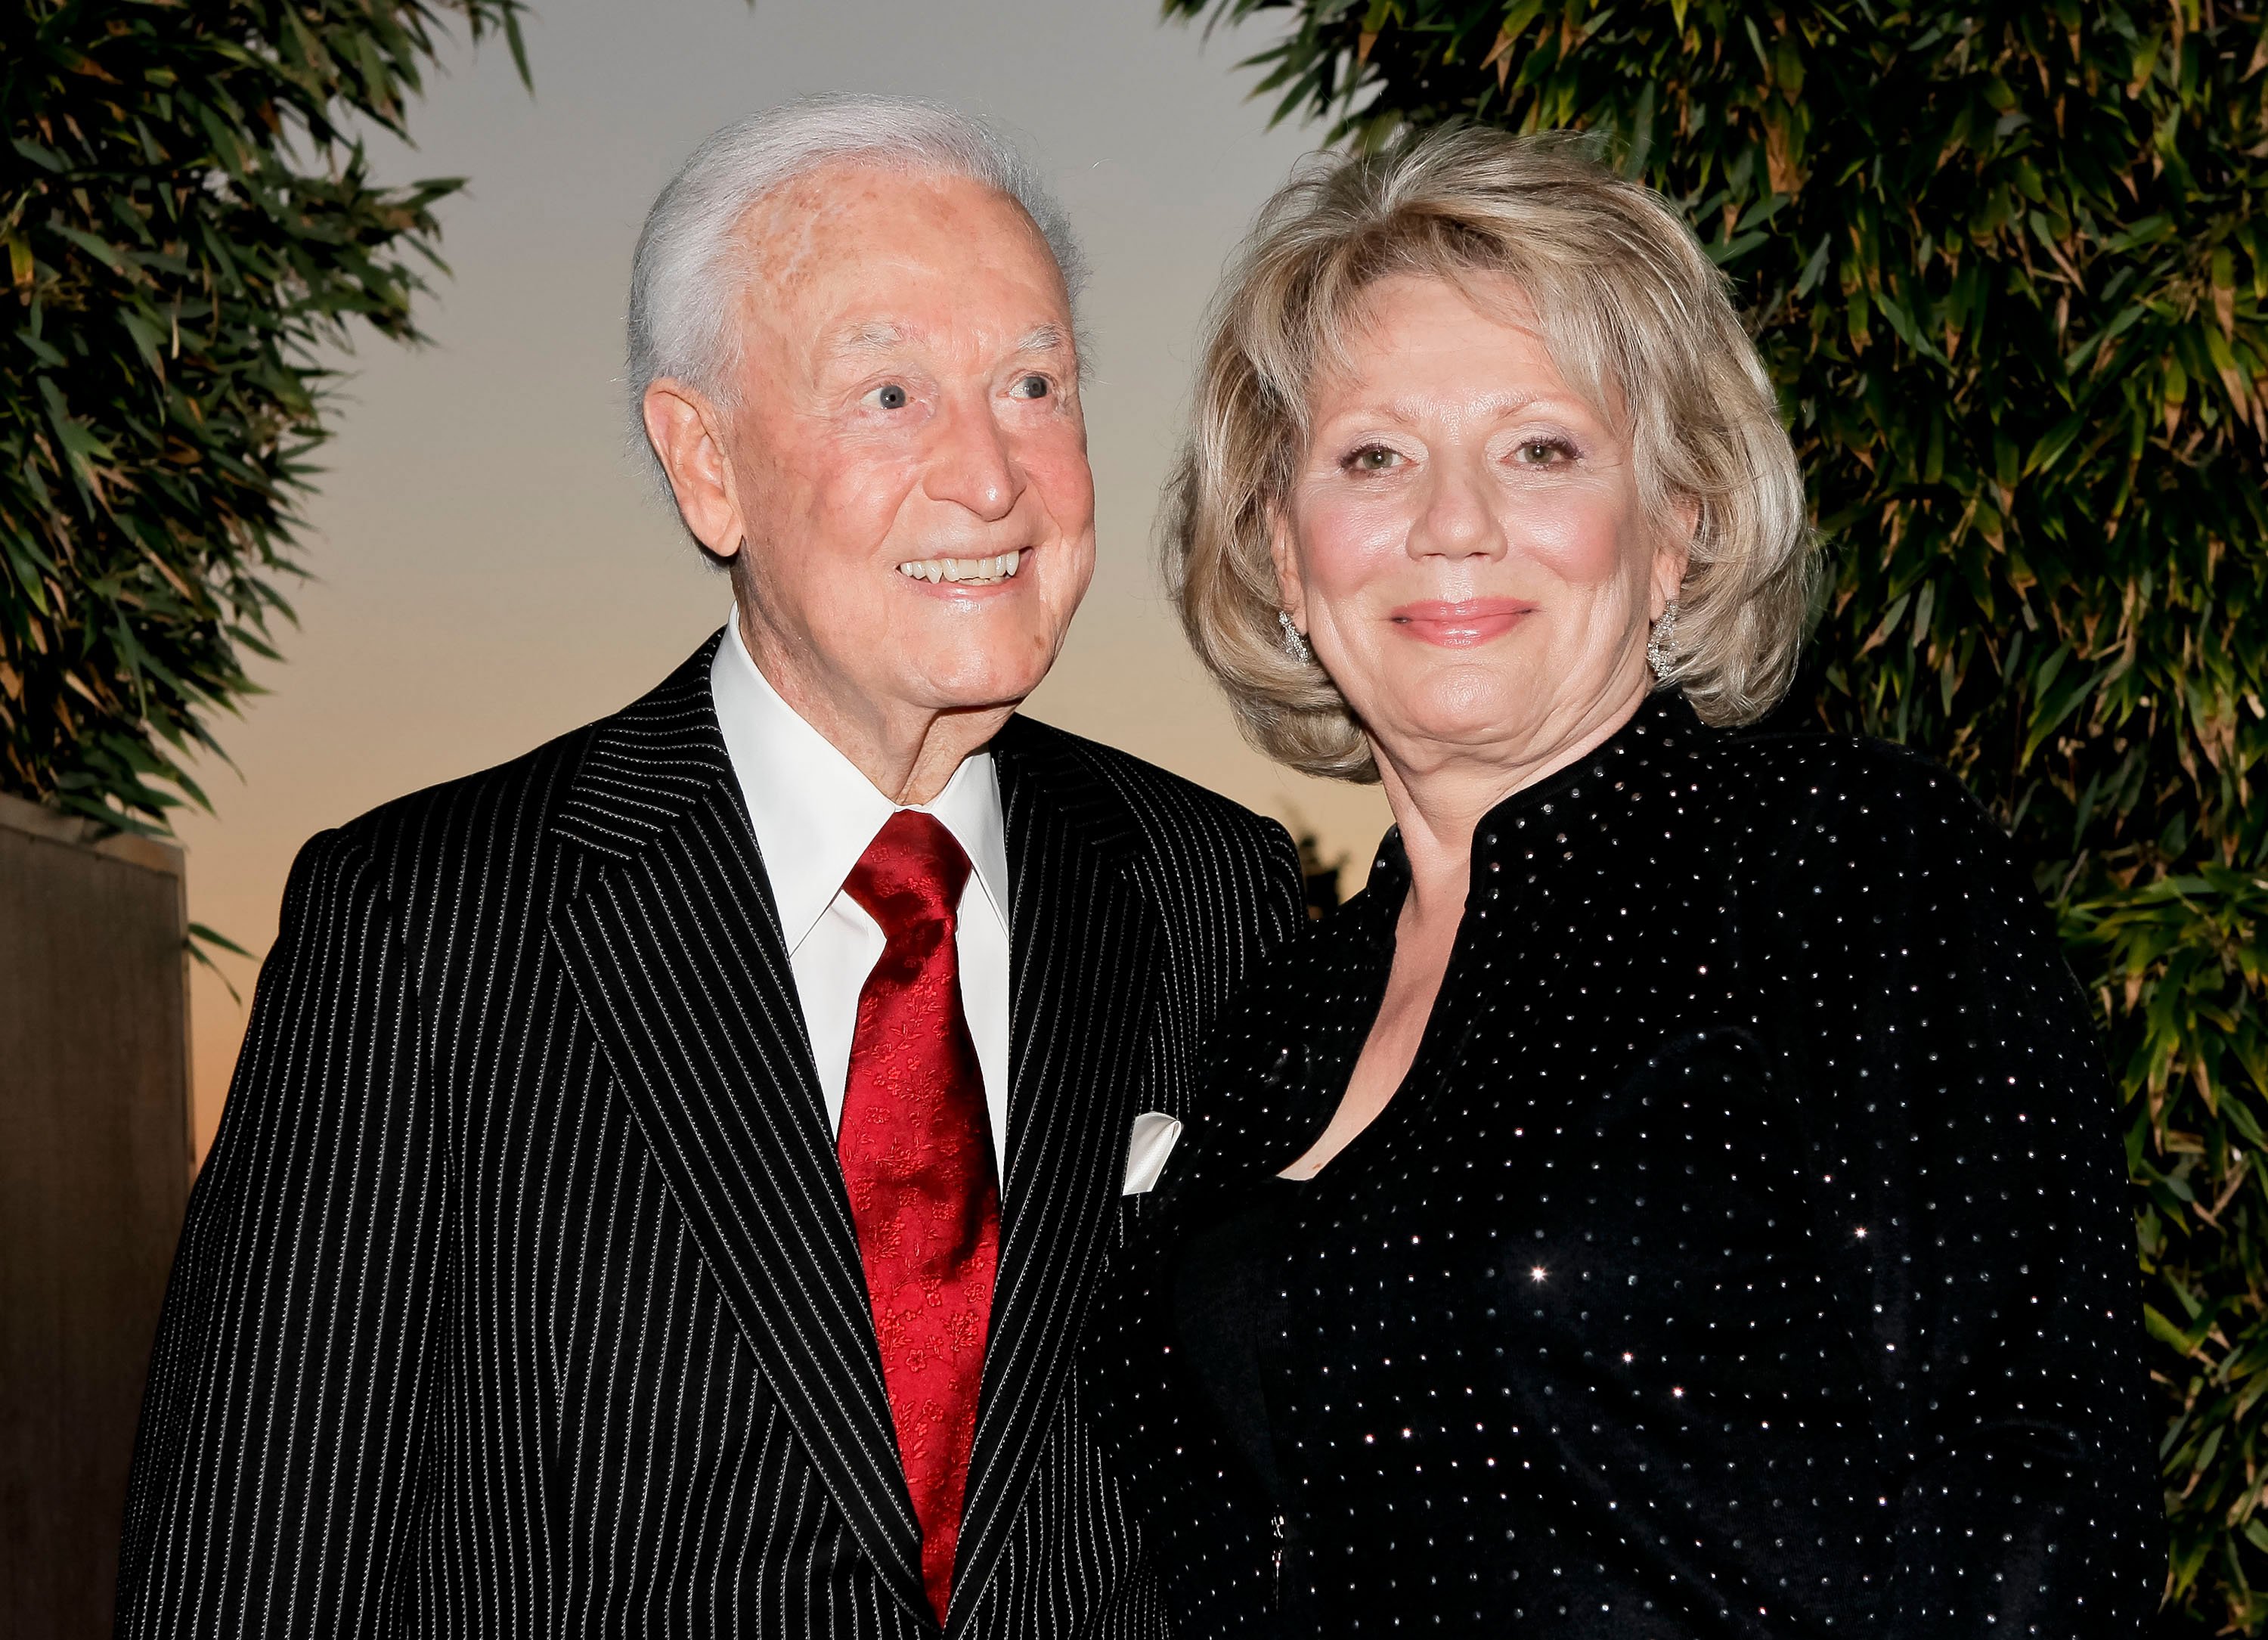 Bob Barker and Nancy Burnet attend the Animal Defenders International gala on October 13, 2012, in Hollywood, California. | Source: Getty Images